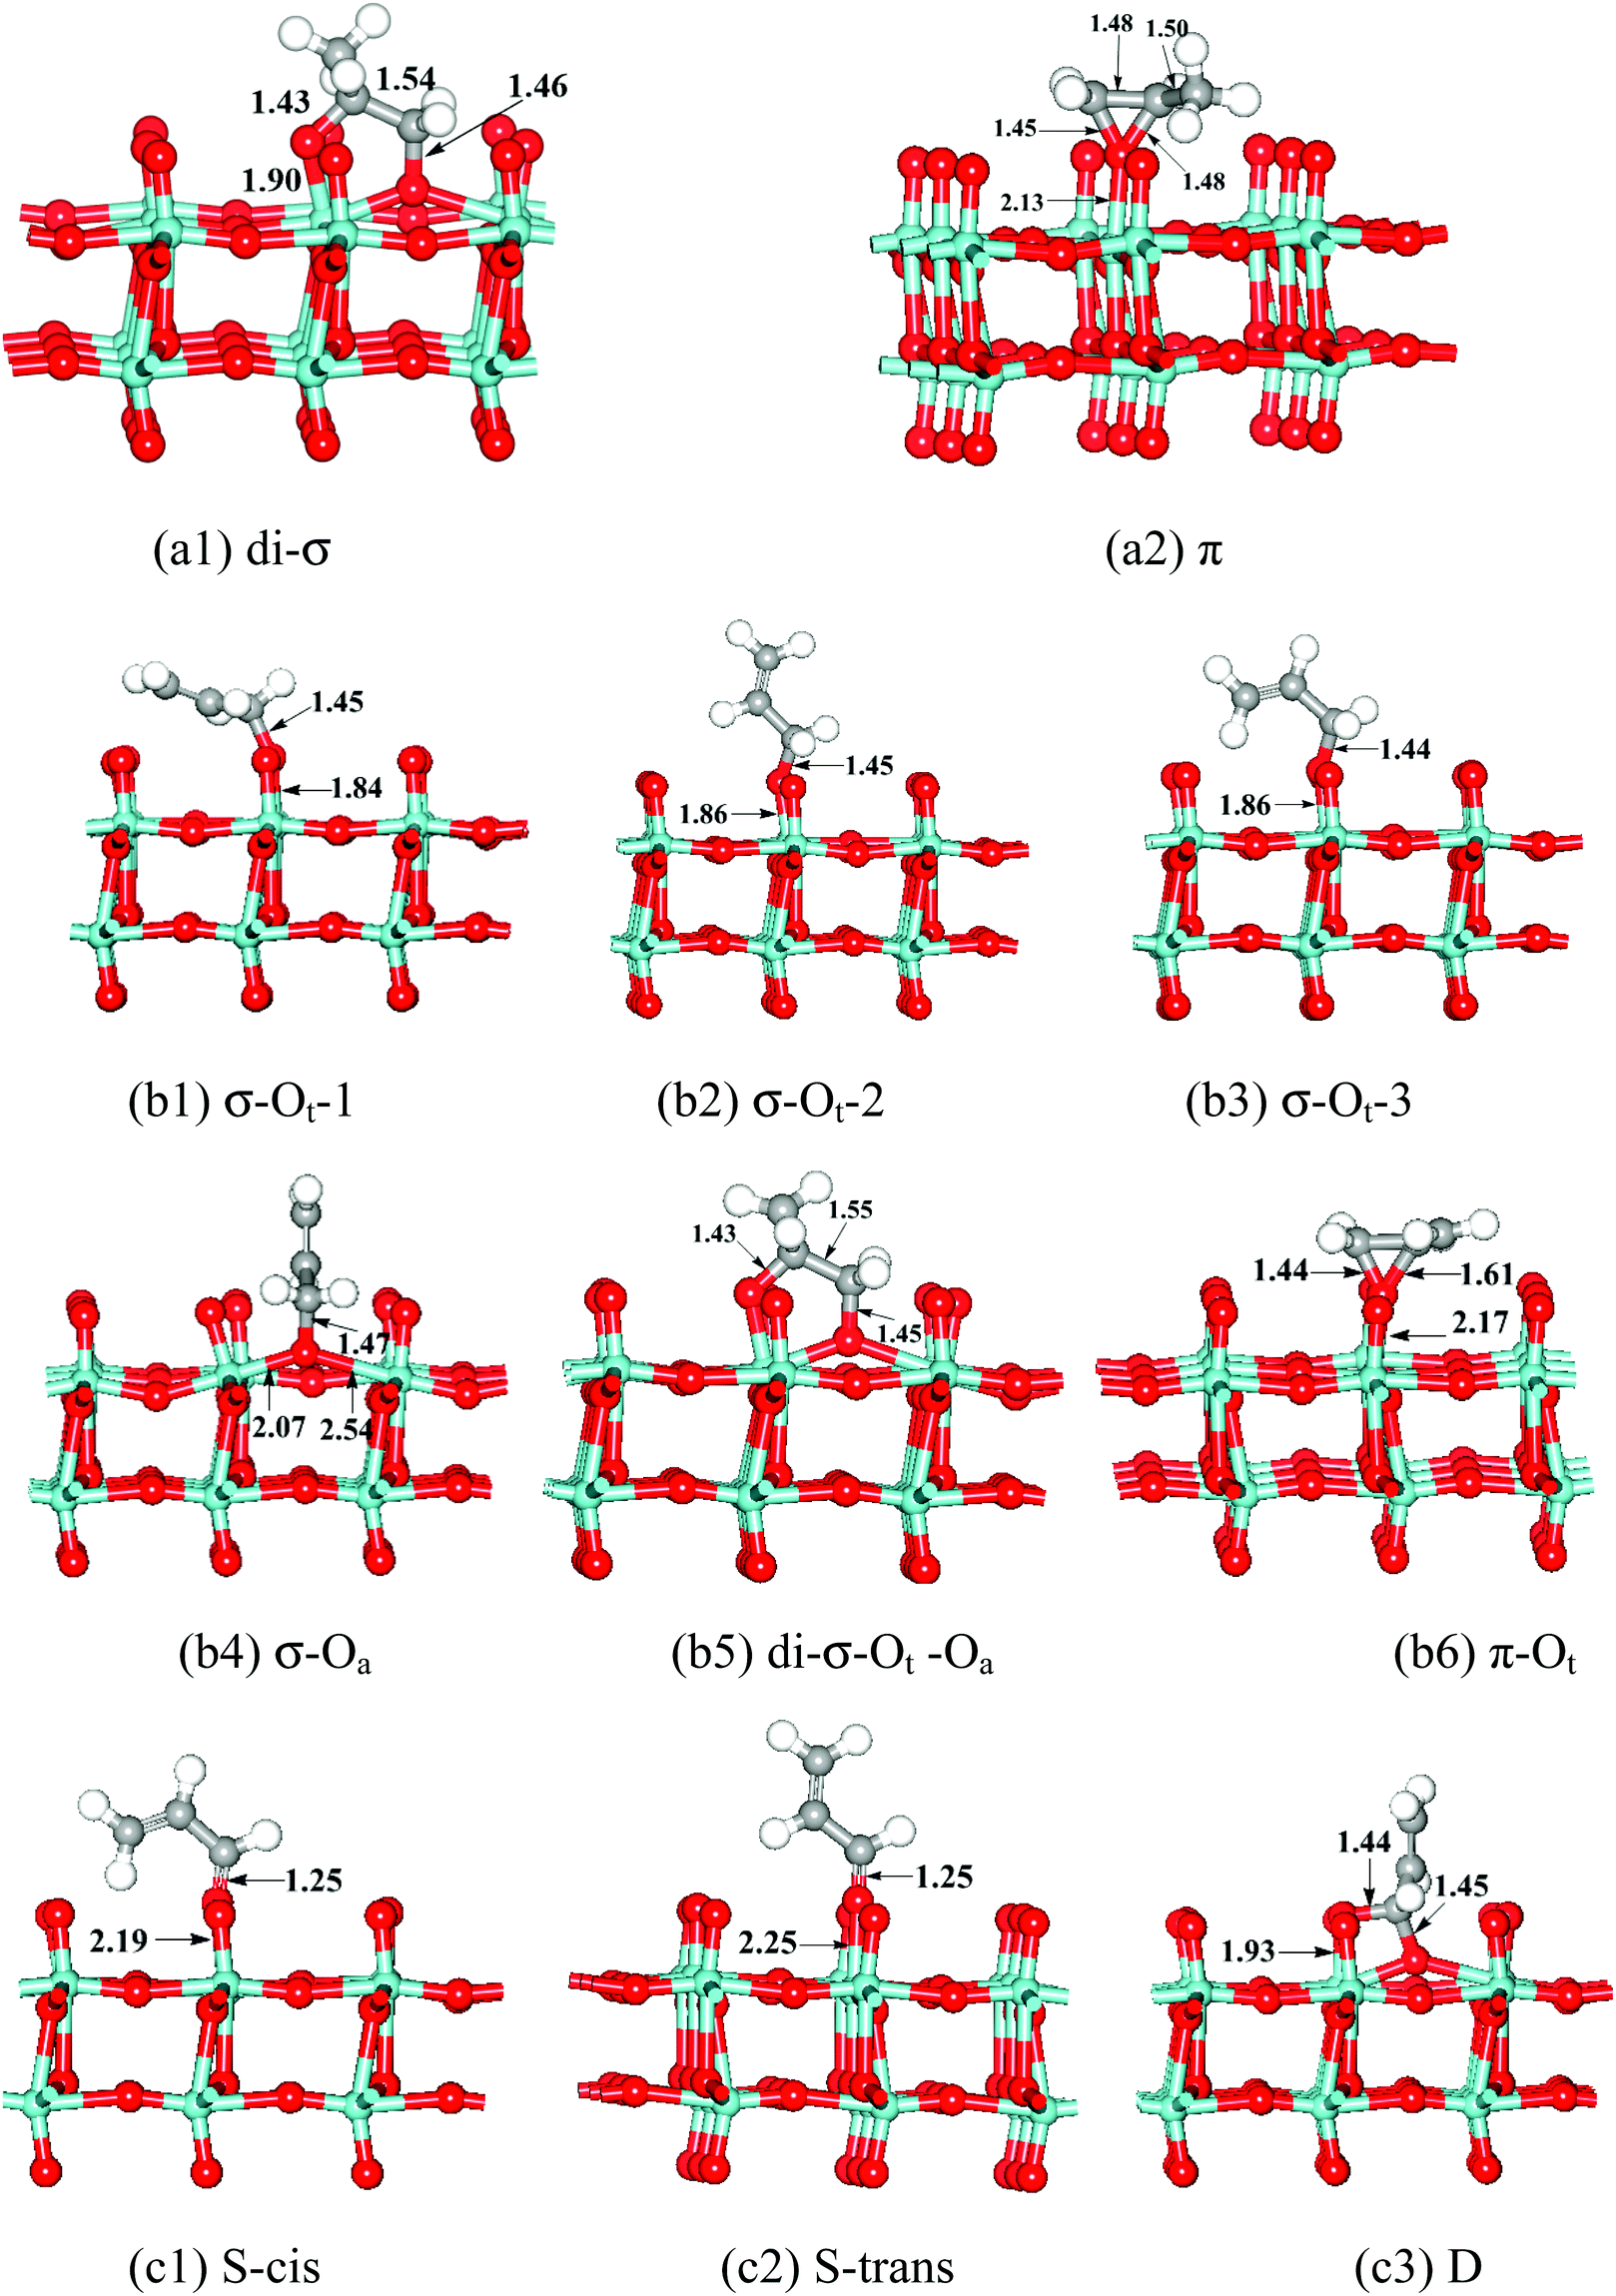 Dft Studies Of Selective Oxidation Of Propene On The Moo 3 010 Surface Physical Chemistry Chemical Physics Rsc Publishing Doi 10 1039 D0cpj